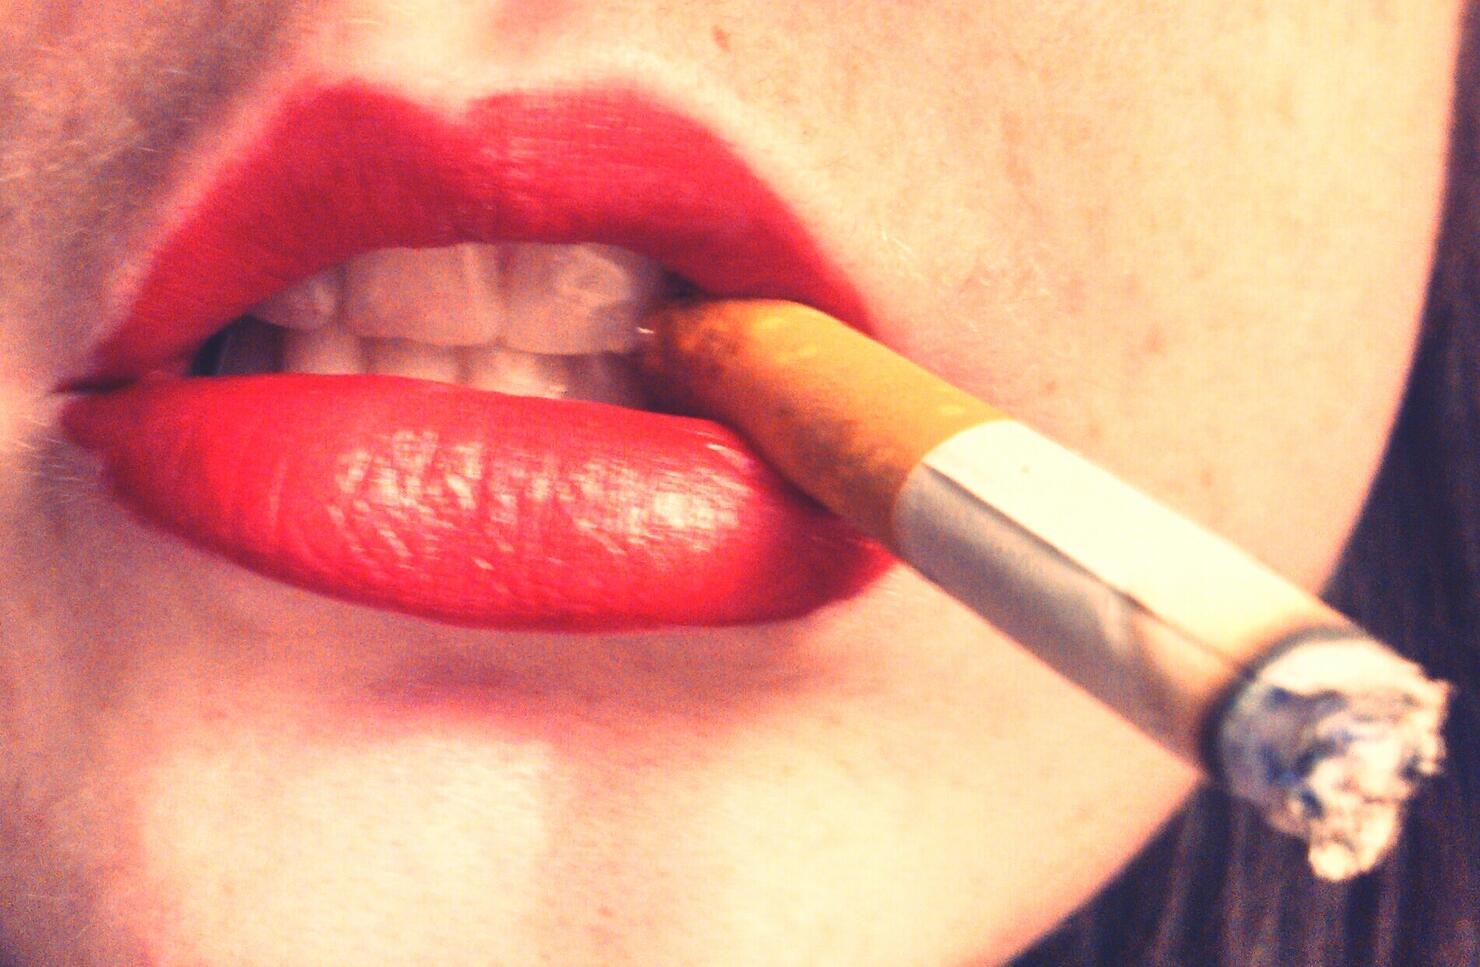 Close-Up Of Woman With Red Lipstick Holding Cigarette In Mouth